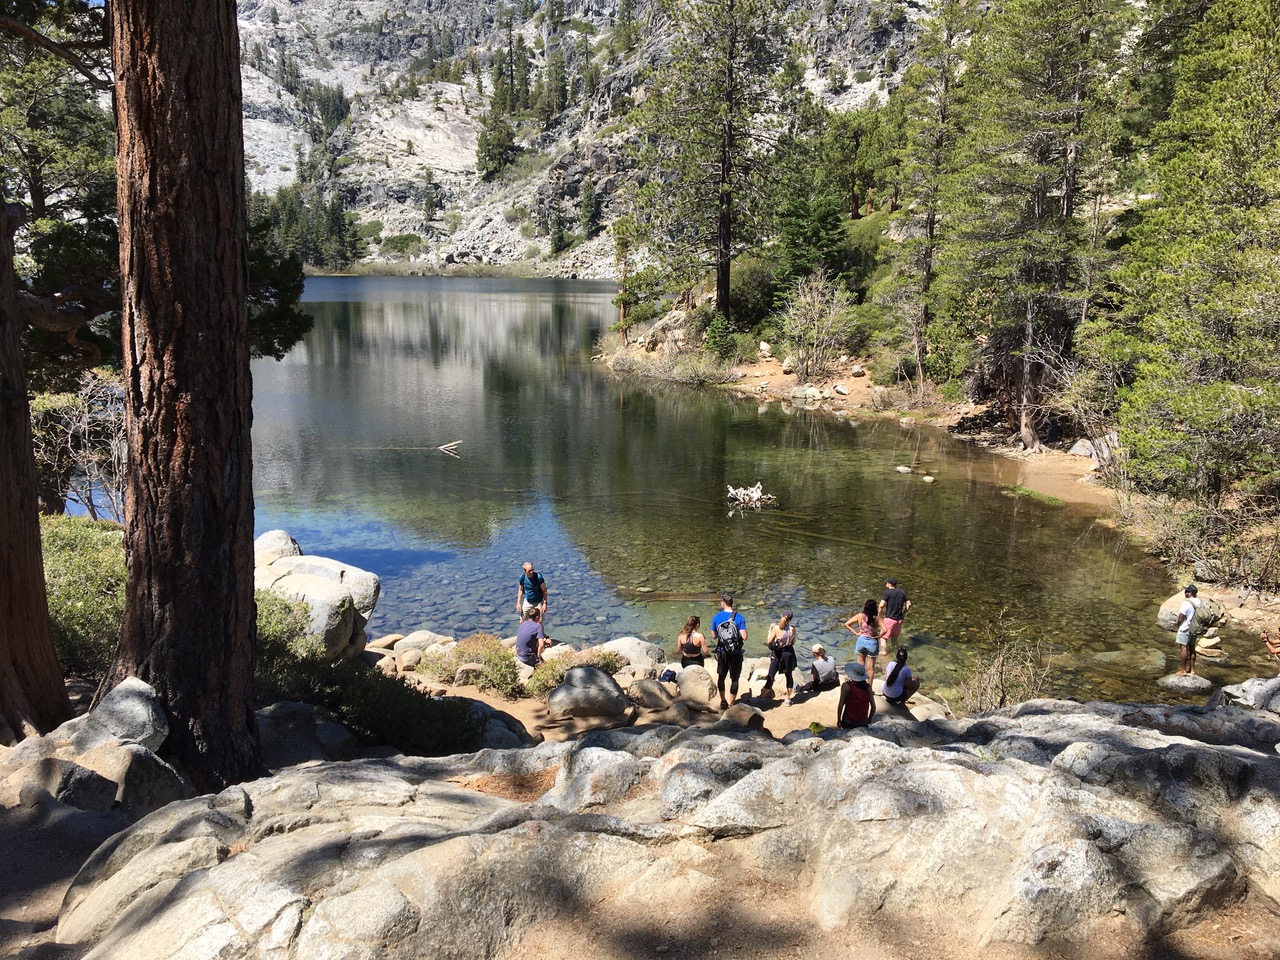  Eagle Lake Trail is one of the most unforgettable hiking trails in California